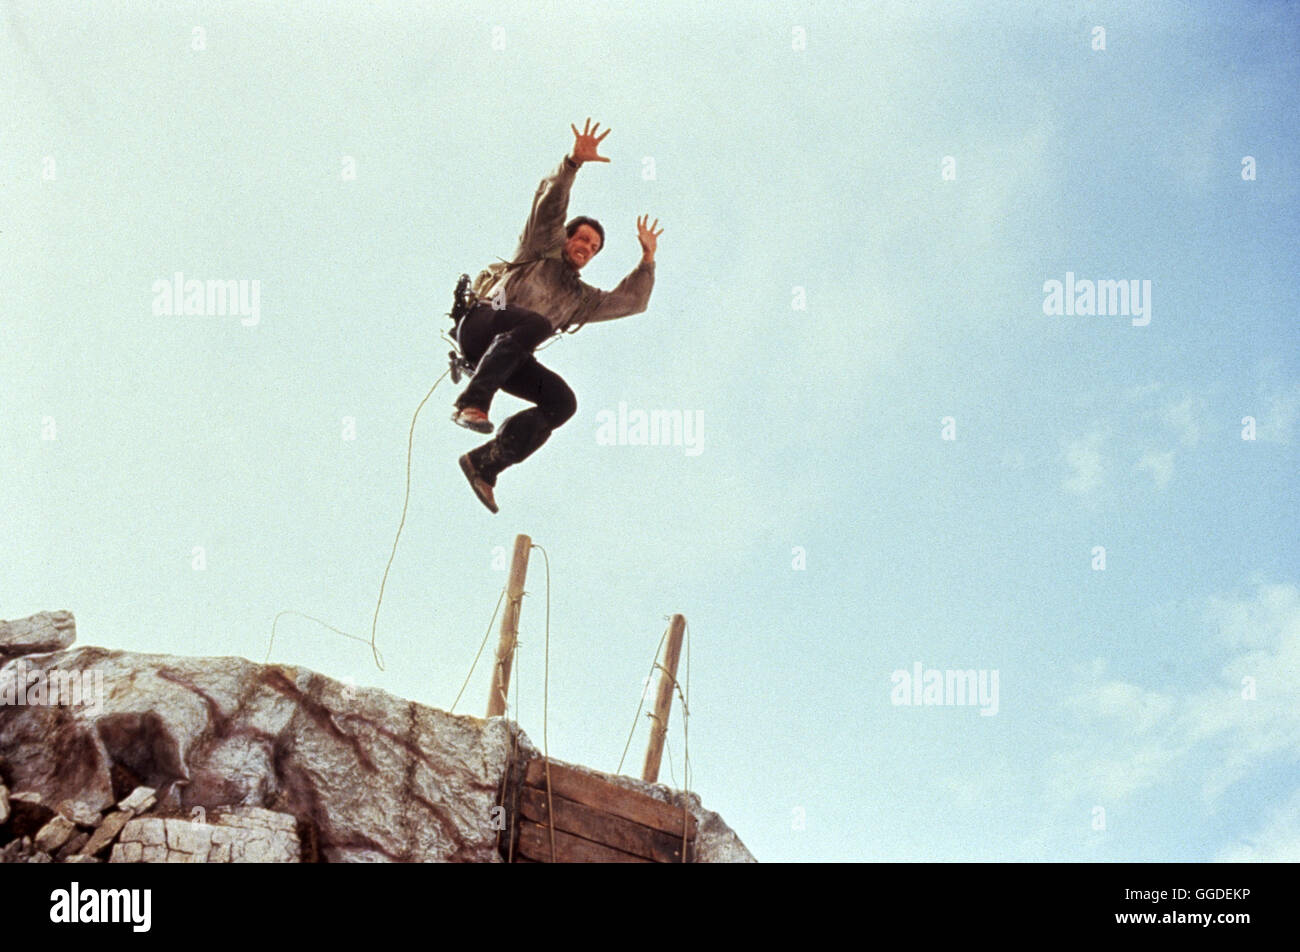 Stallone Cliffhanger High Resolution Stock Photography and Images - Alamy